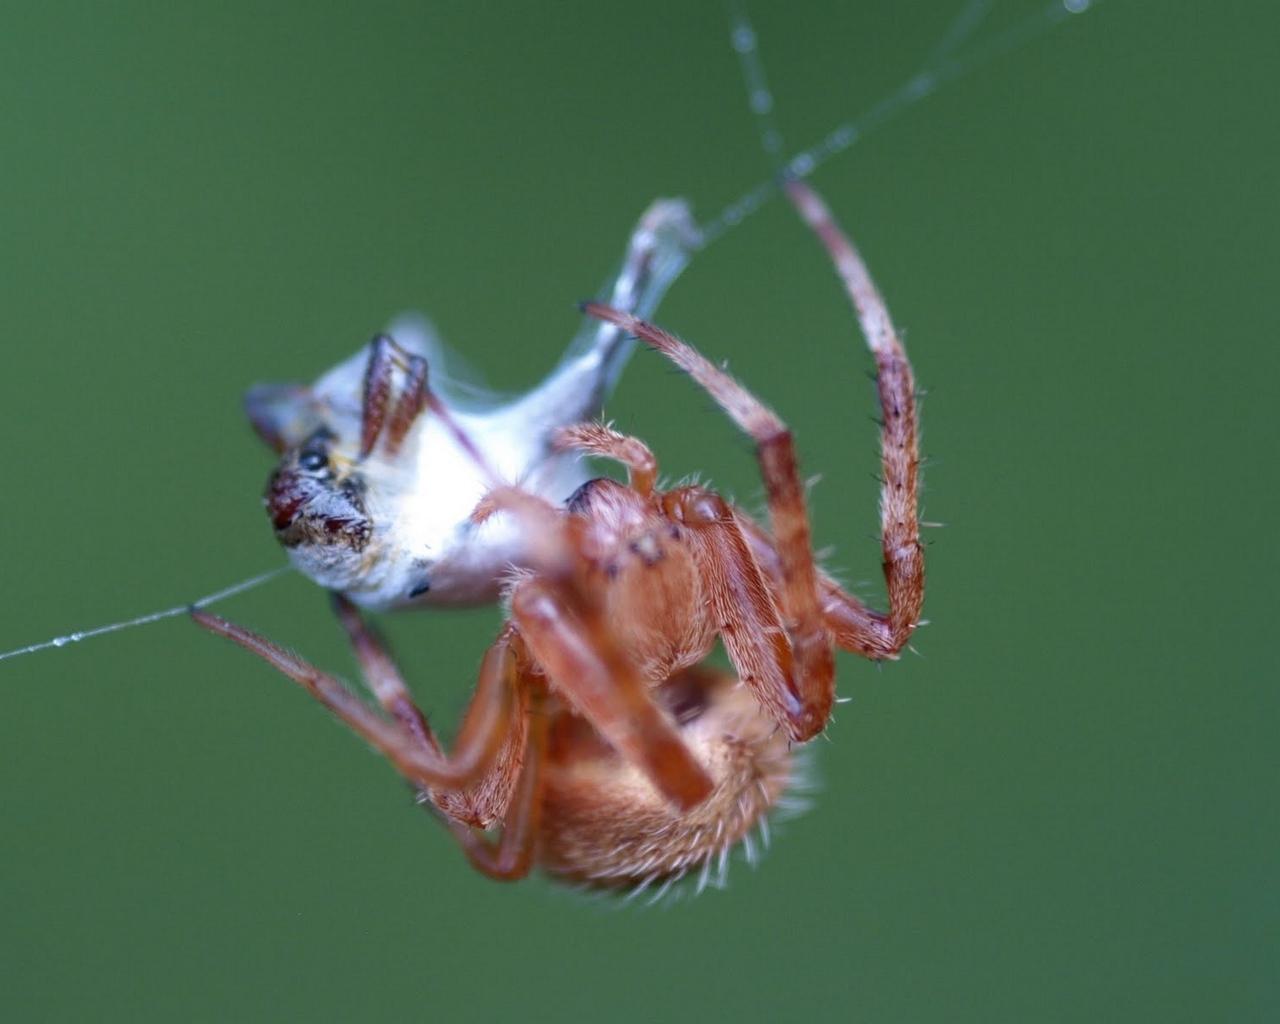 Download wallpaper 1280x1024 spider, web, mucus, production